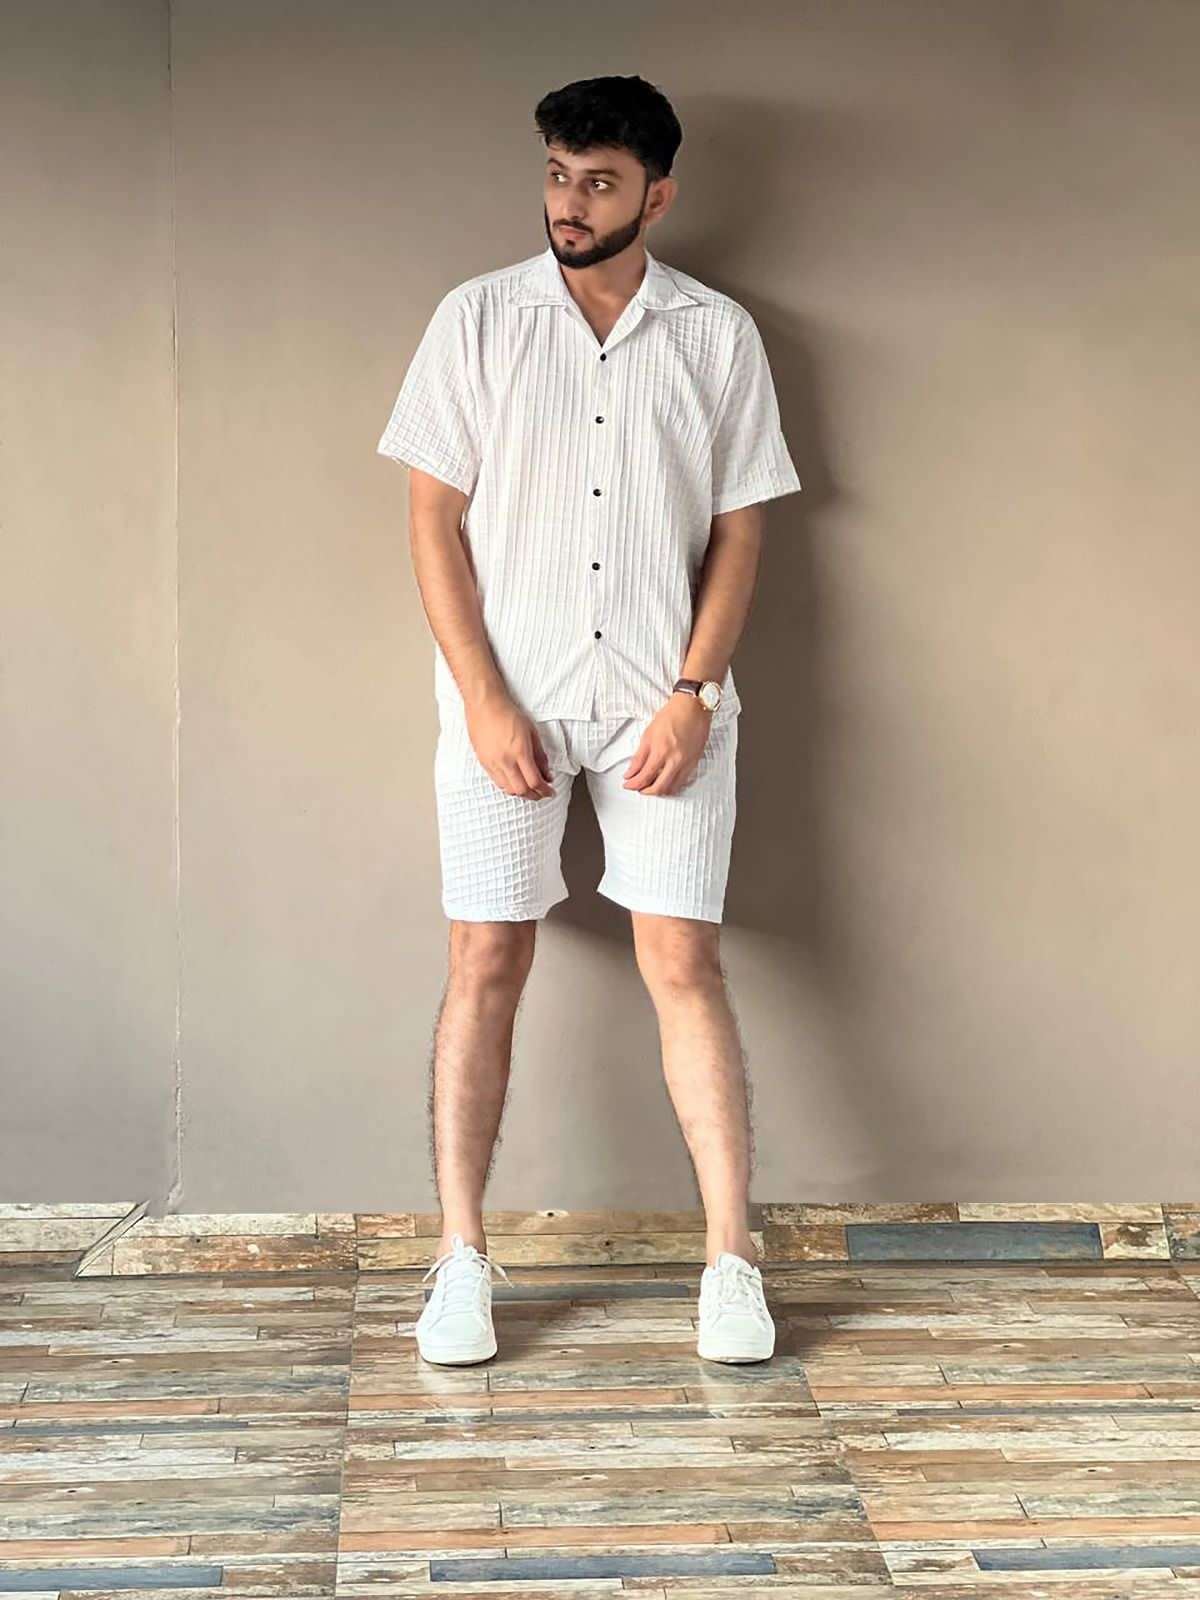 SWR VOL-4 BY ASLIWHOLESALE PURE IMPORTED MENS SHIRT AND SHORTS PAIR